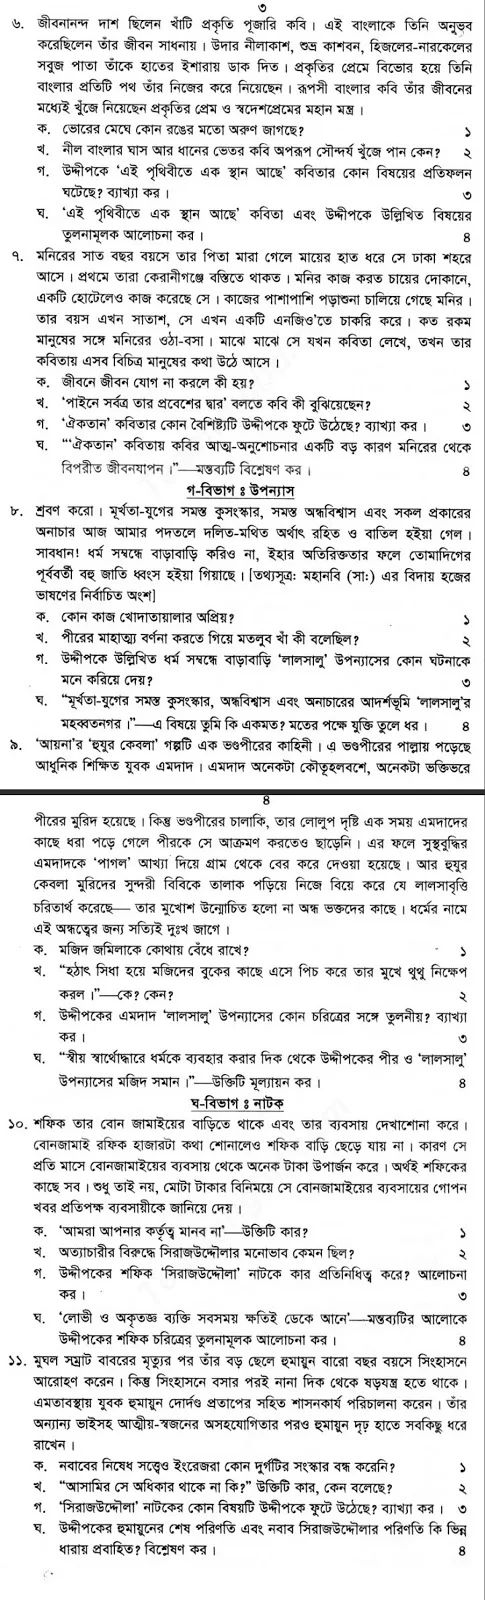 Hsc Bangla 1st Paper Suggetion 2020 | Hsc Bangla 1st Paper Question and Suggetion 2020  